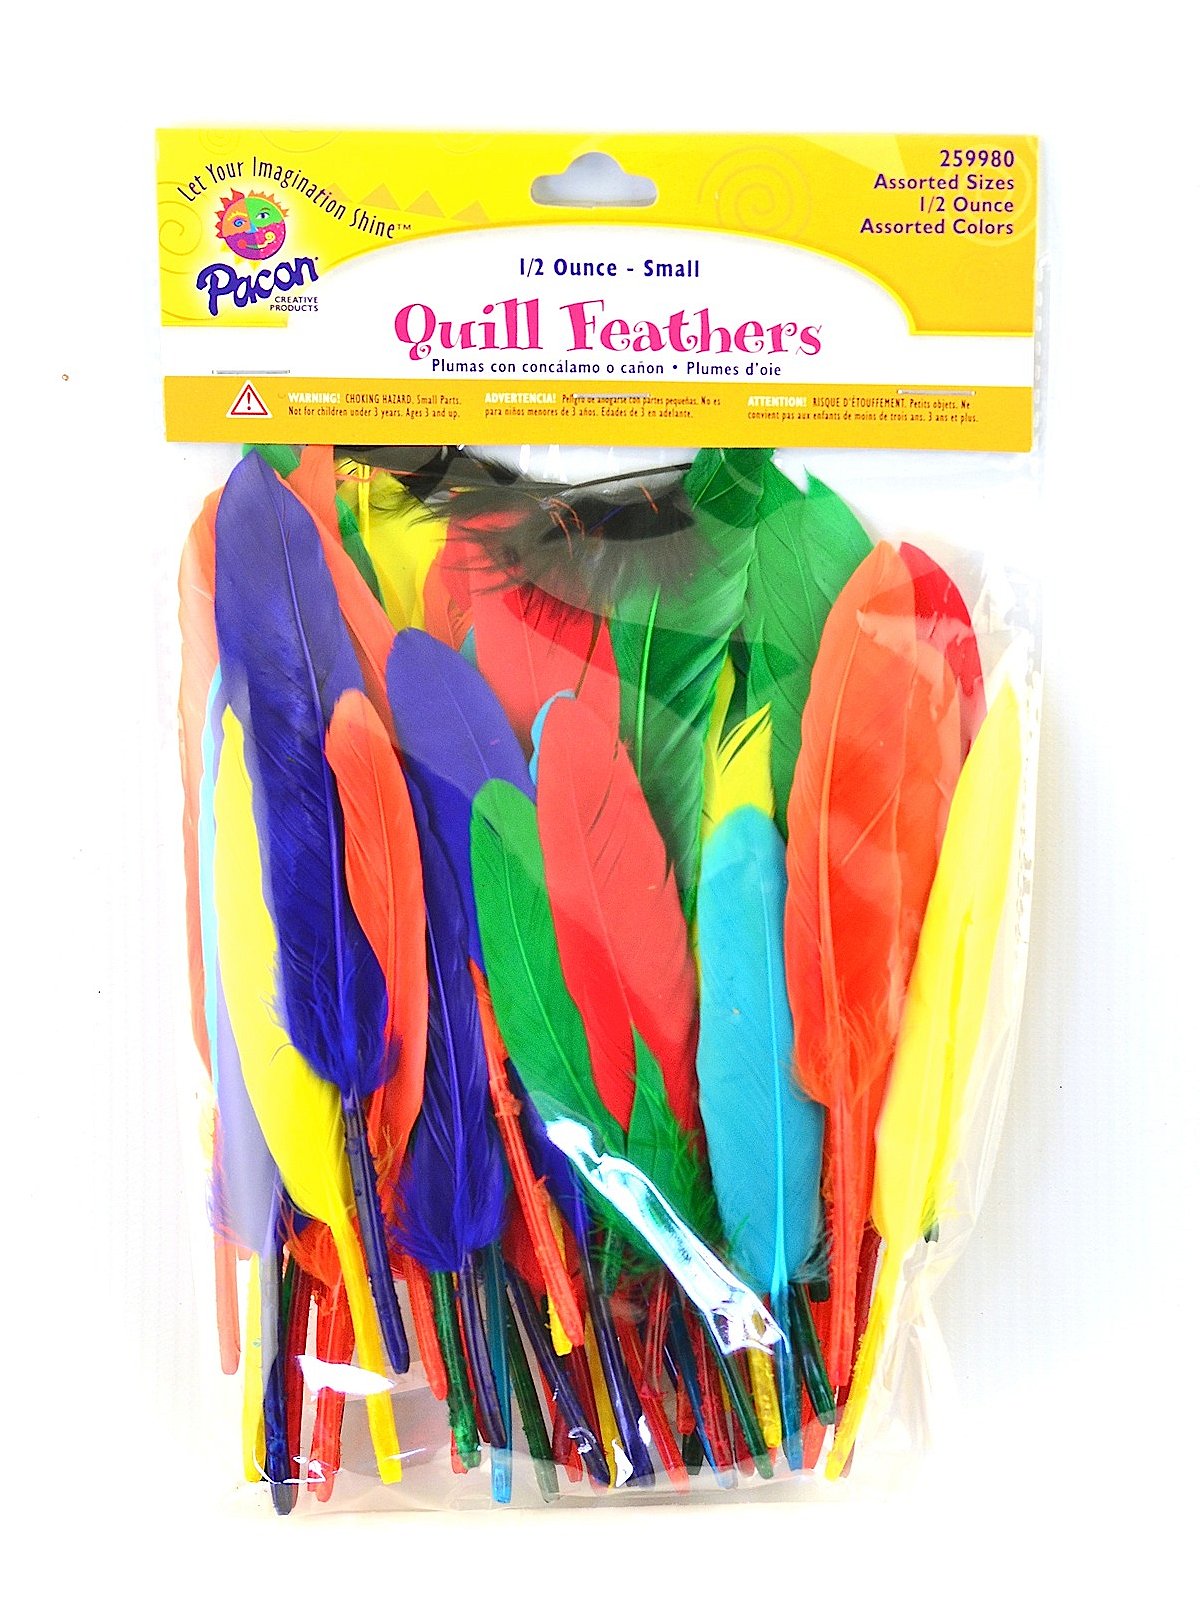 Kids Crafting Feathers